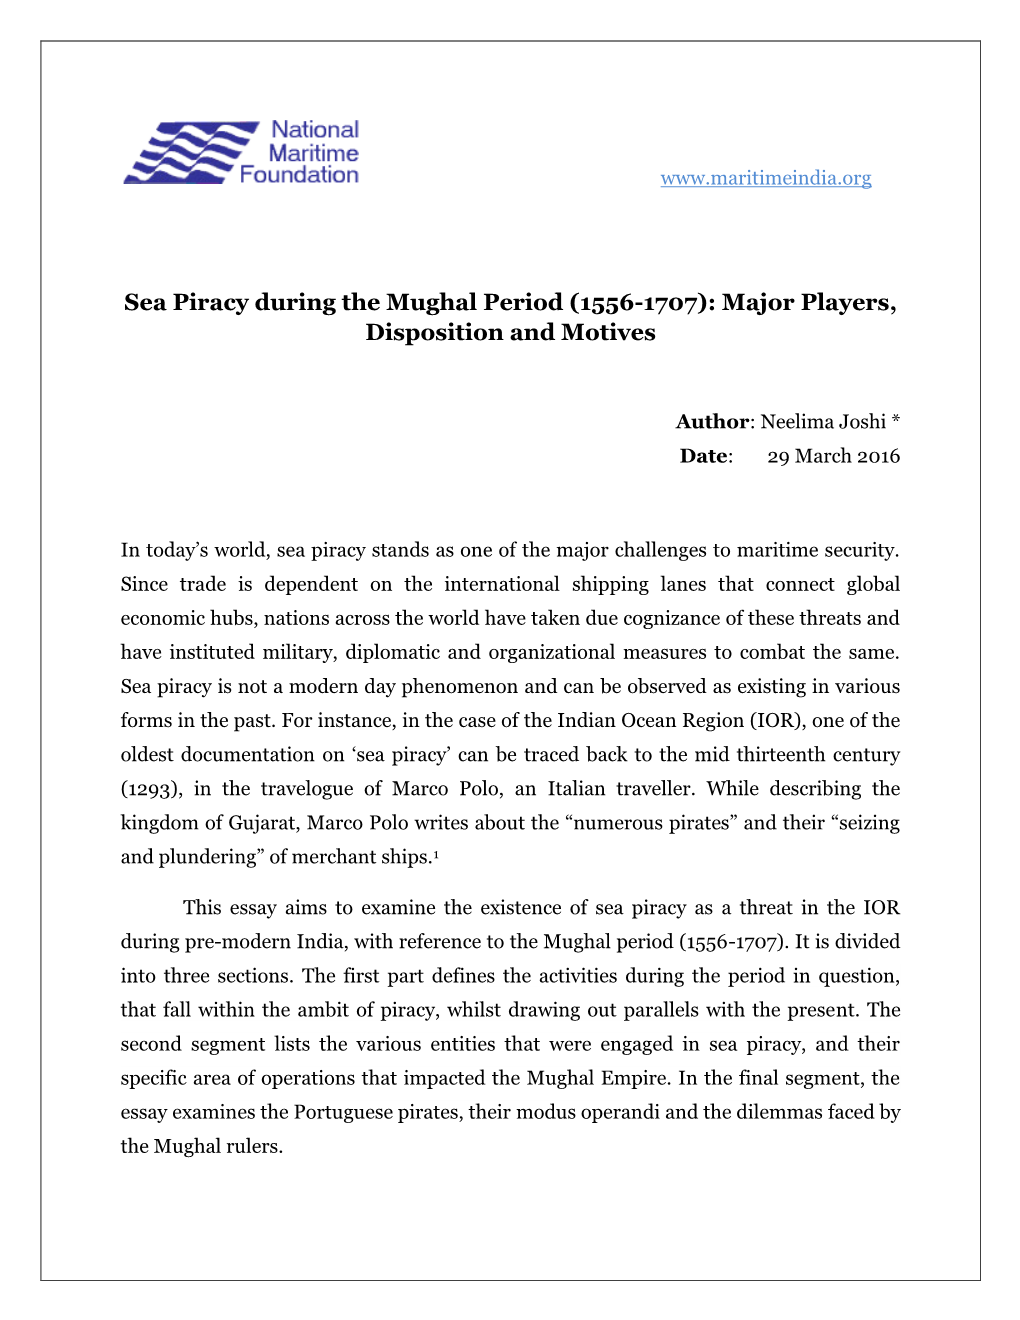 Sea Piracy During the Mughal Period (1556-1707): Major Players, Disposition and Motives